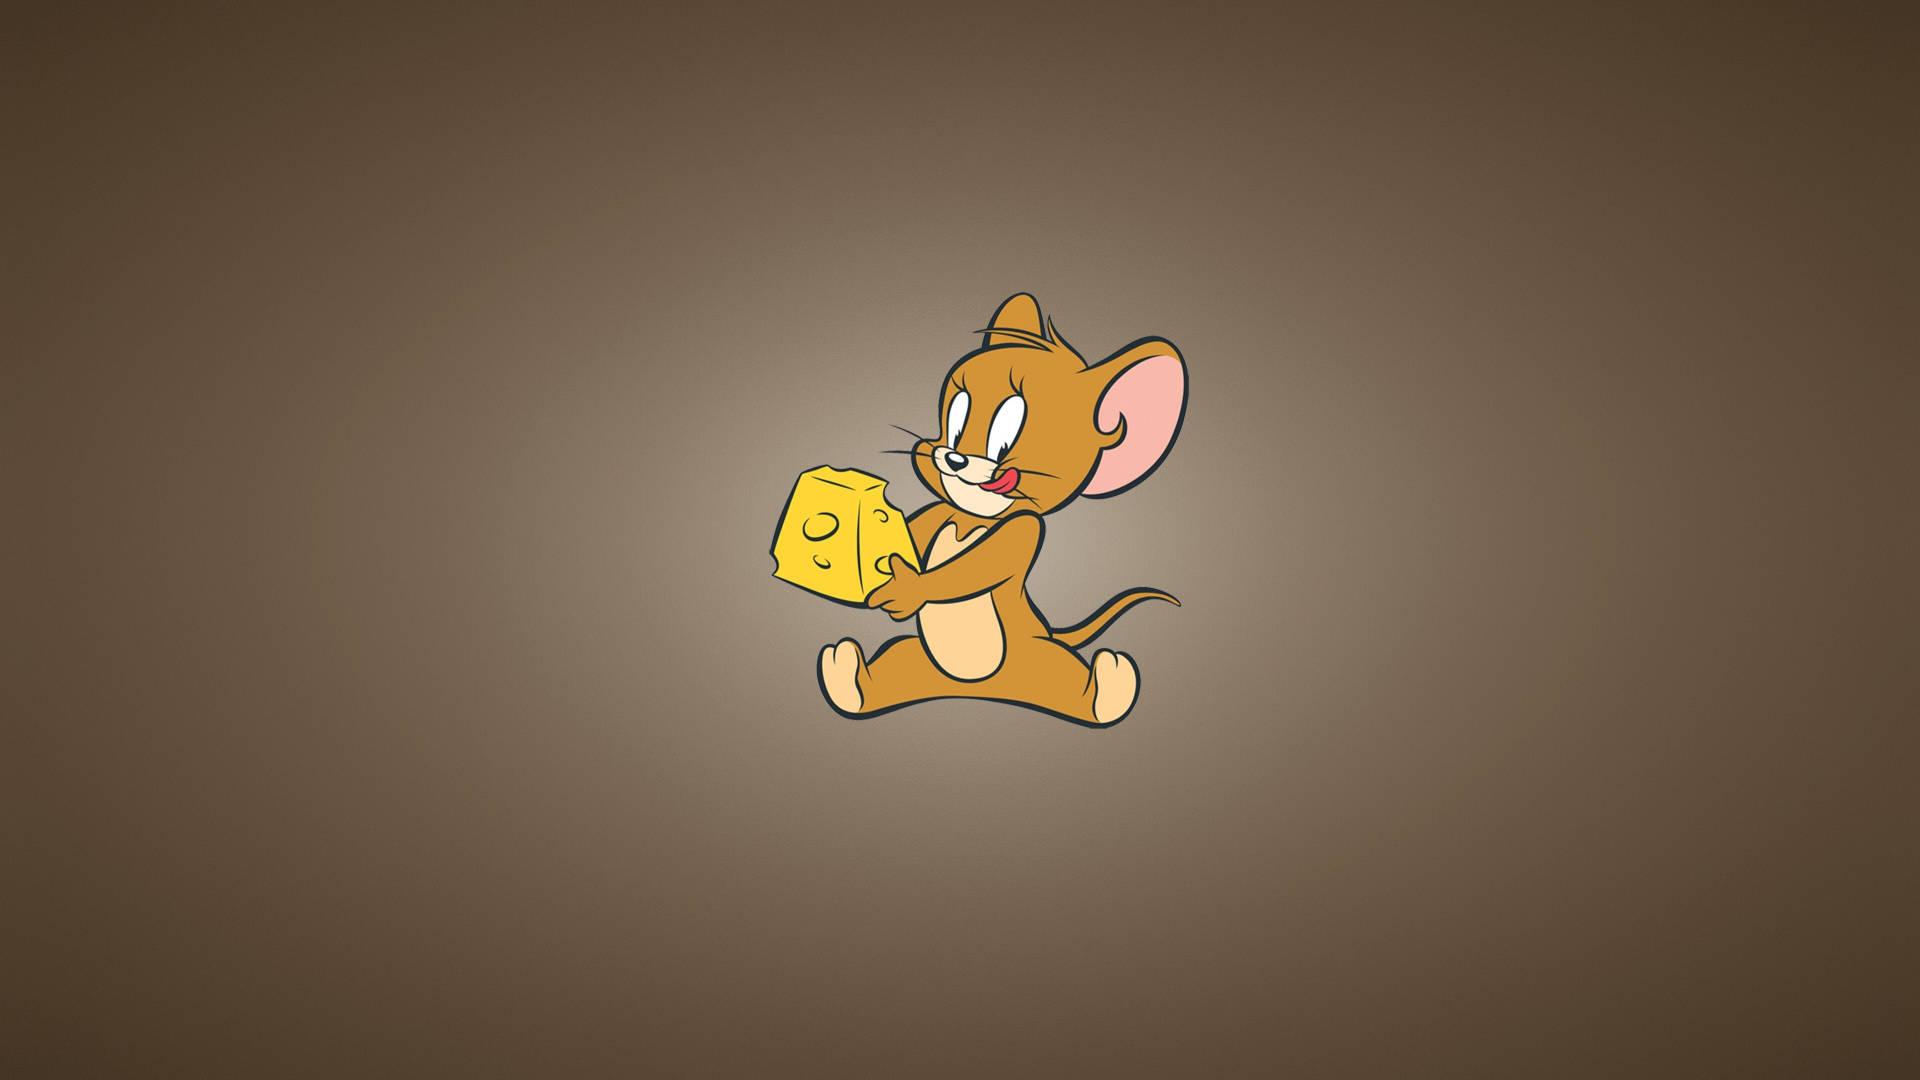 3840X2160 Tom And Jerry Wallpaper and Background